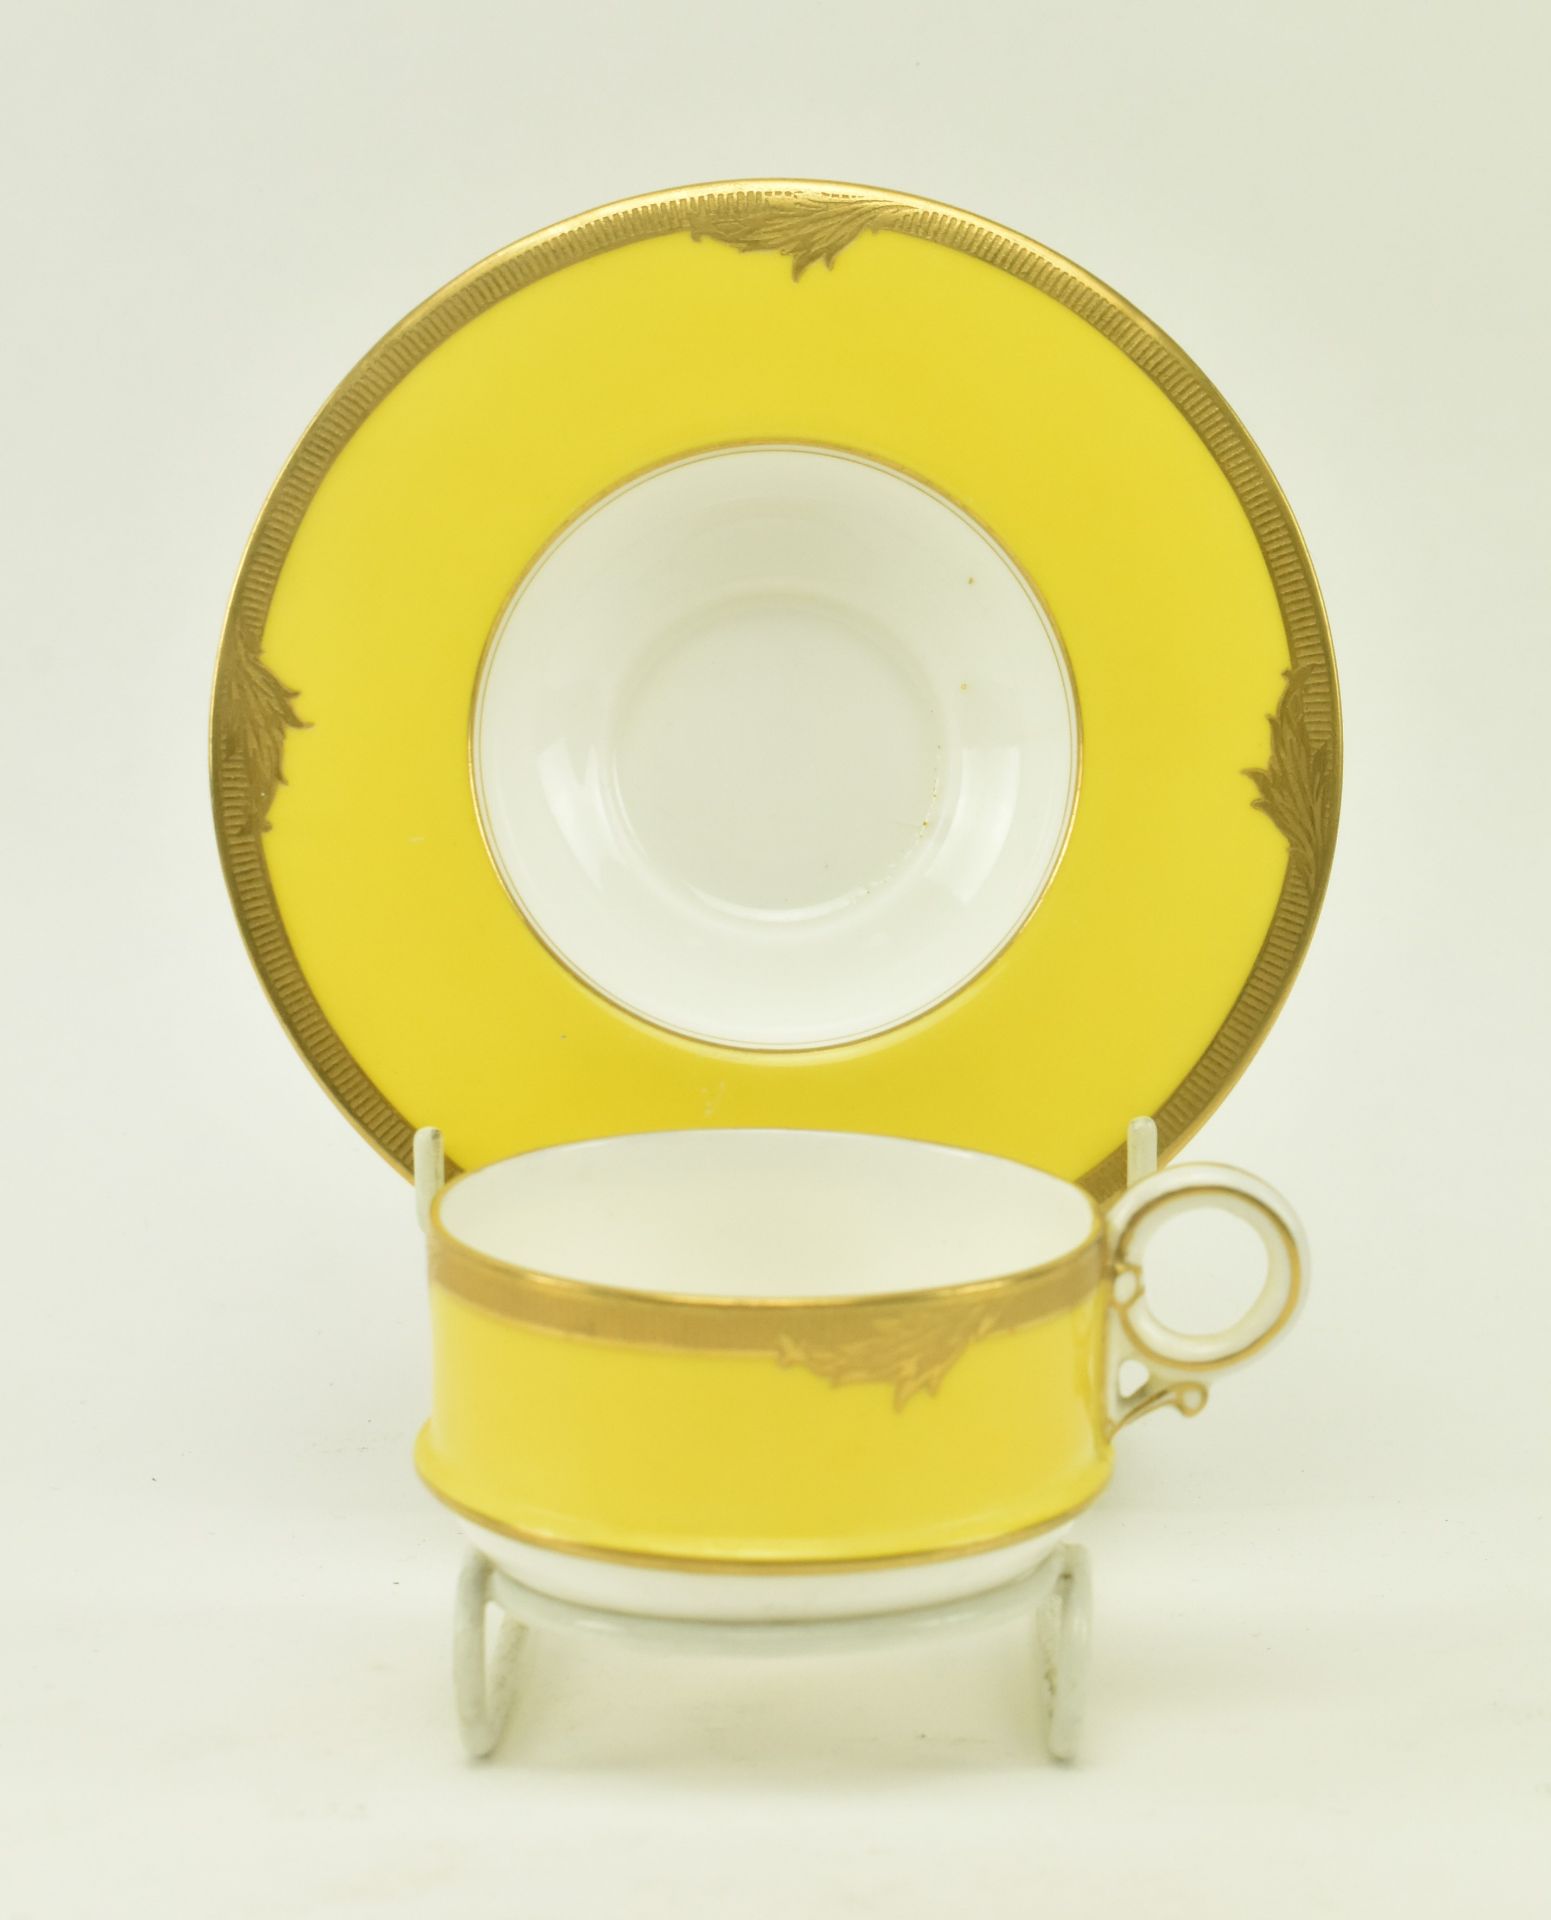 EARLY 20TH CENTURY ROYAL WORCESTER YELLOW TEACUP & SAUCER - Image 2 of 7